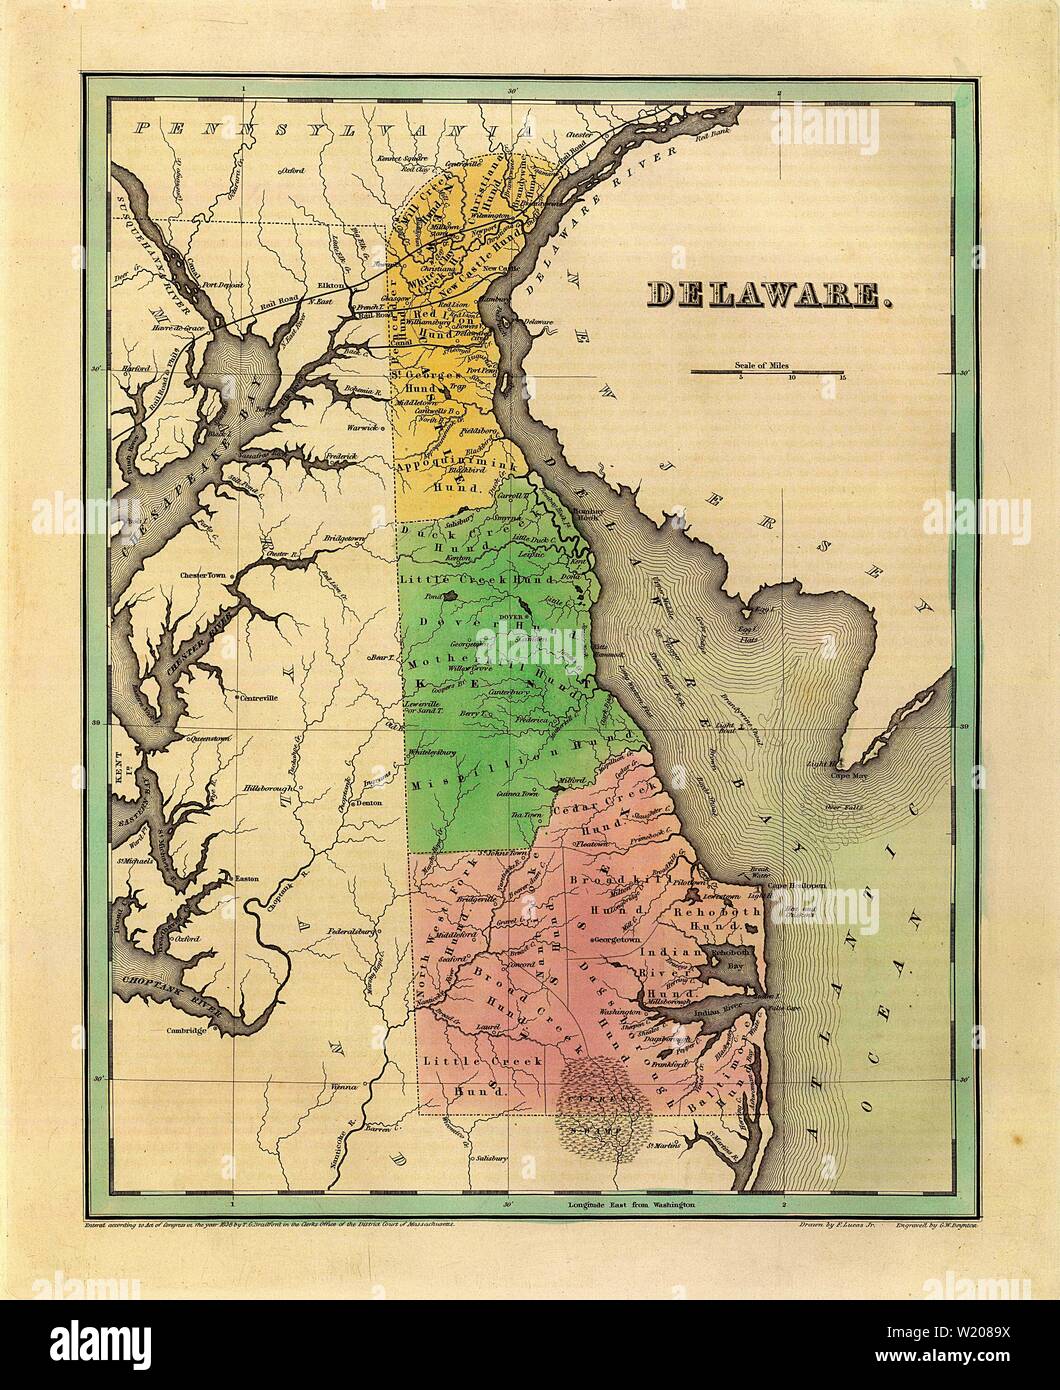 1838 Map of Delaware - Vintage Antiquarian Map by Bradford Stock Photo